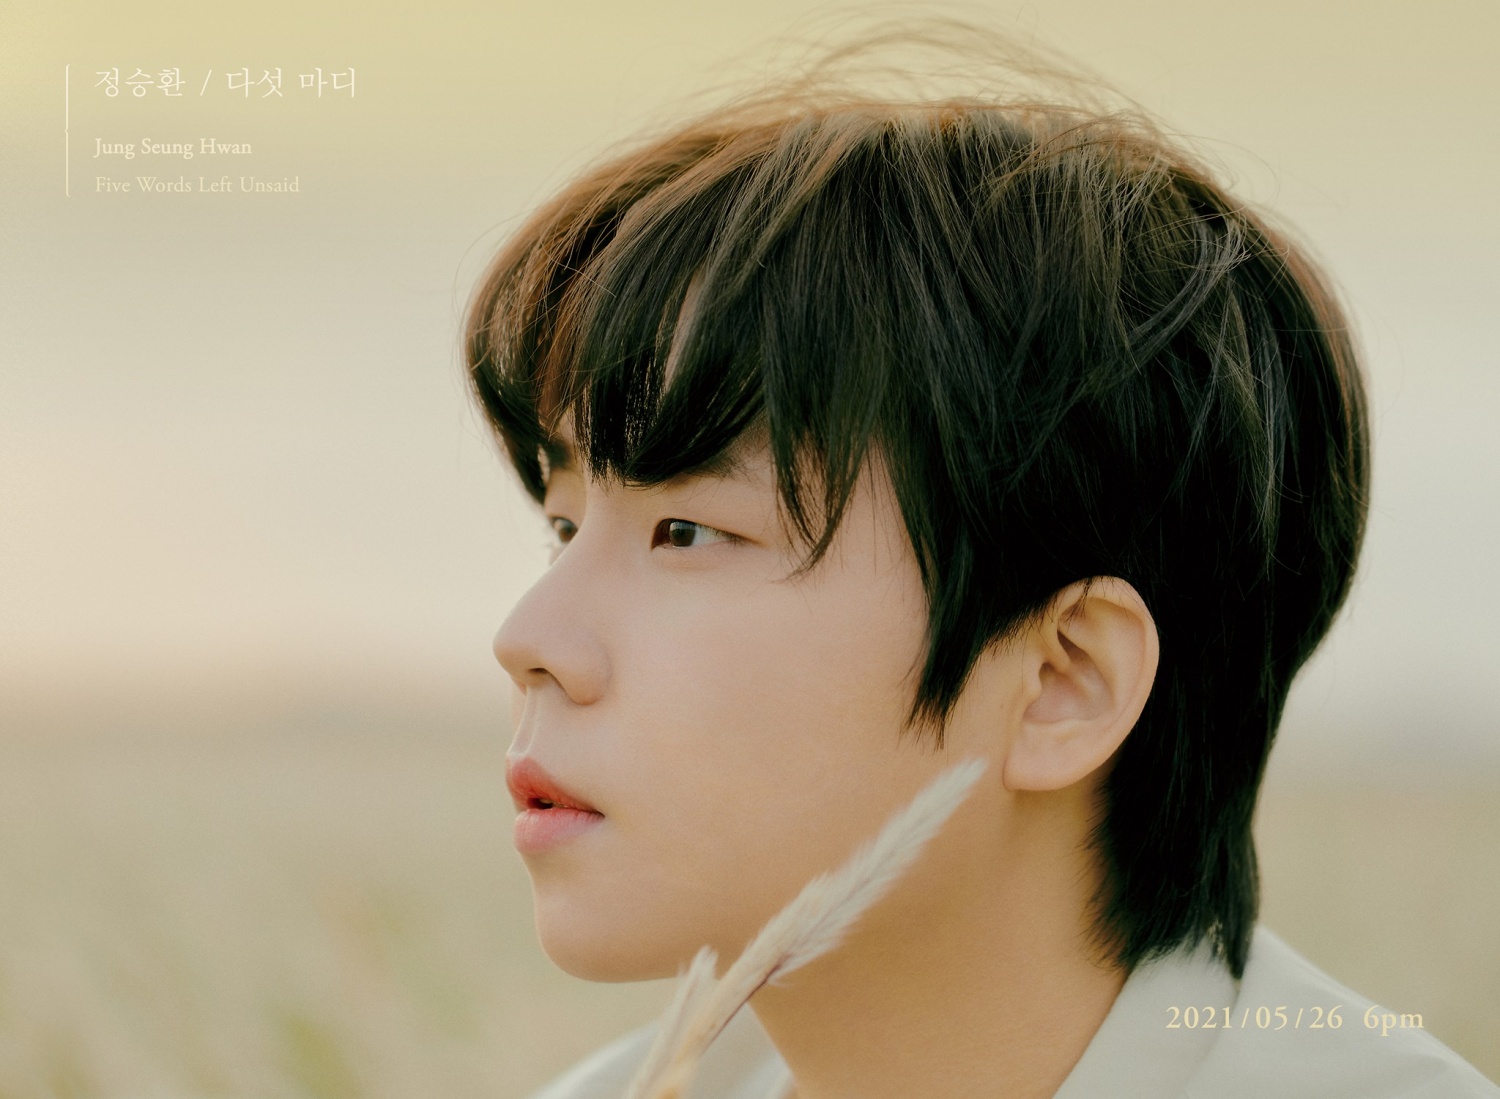 Jung Seung-hwan reveals new album photo Feeling of spring